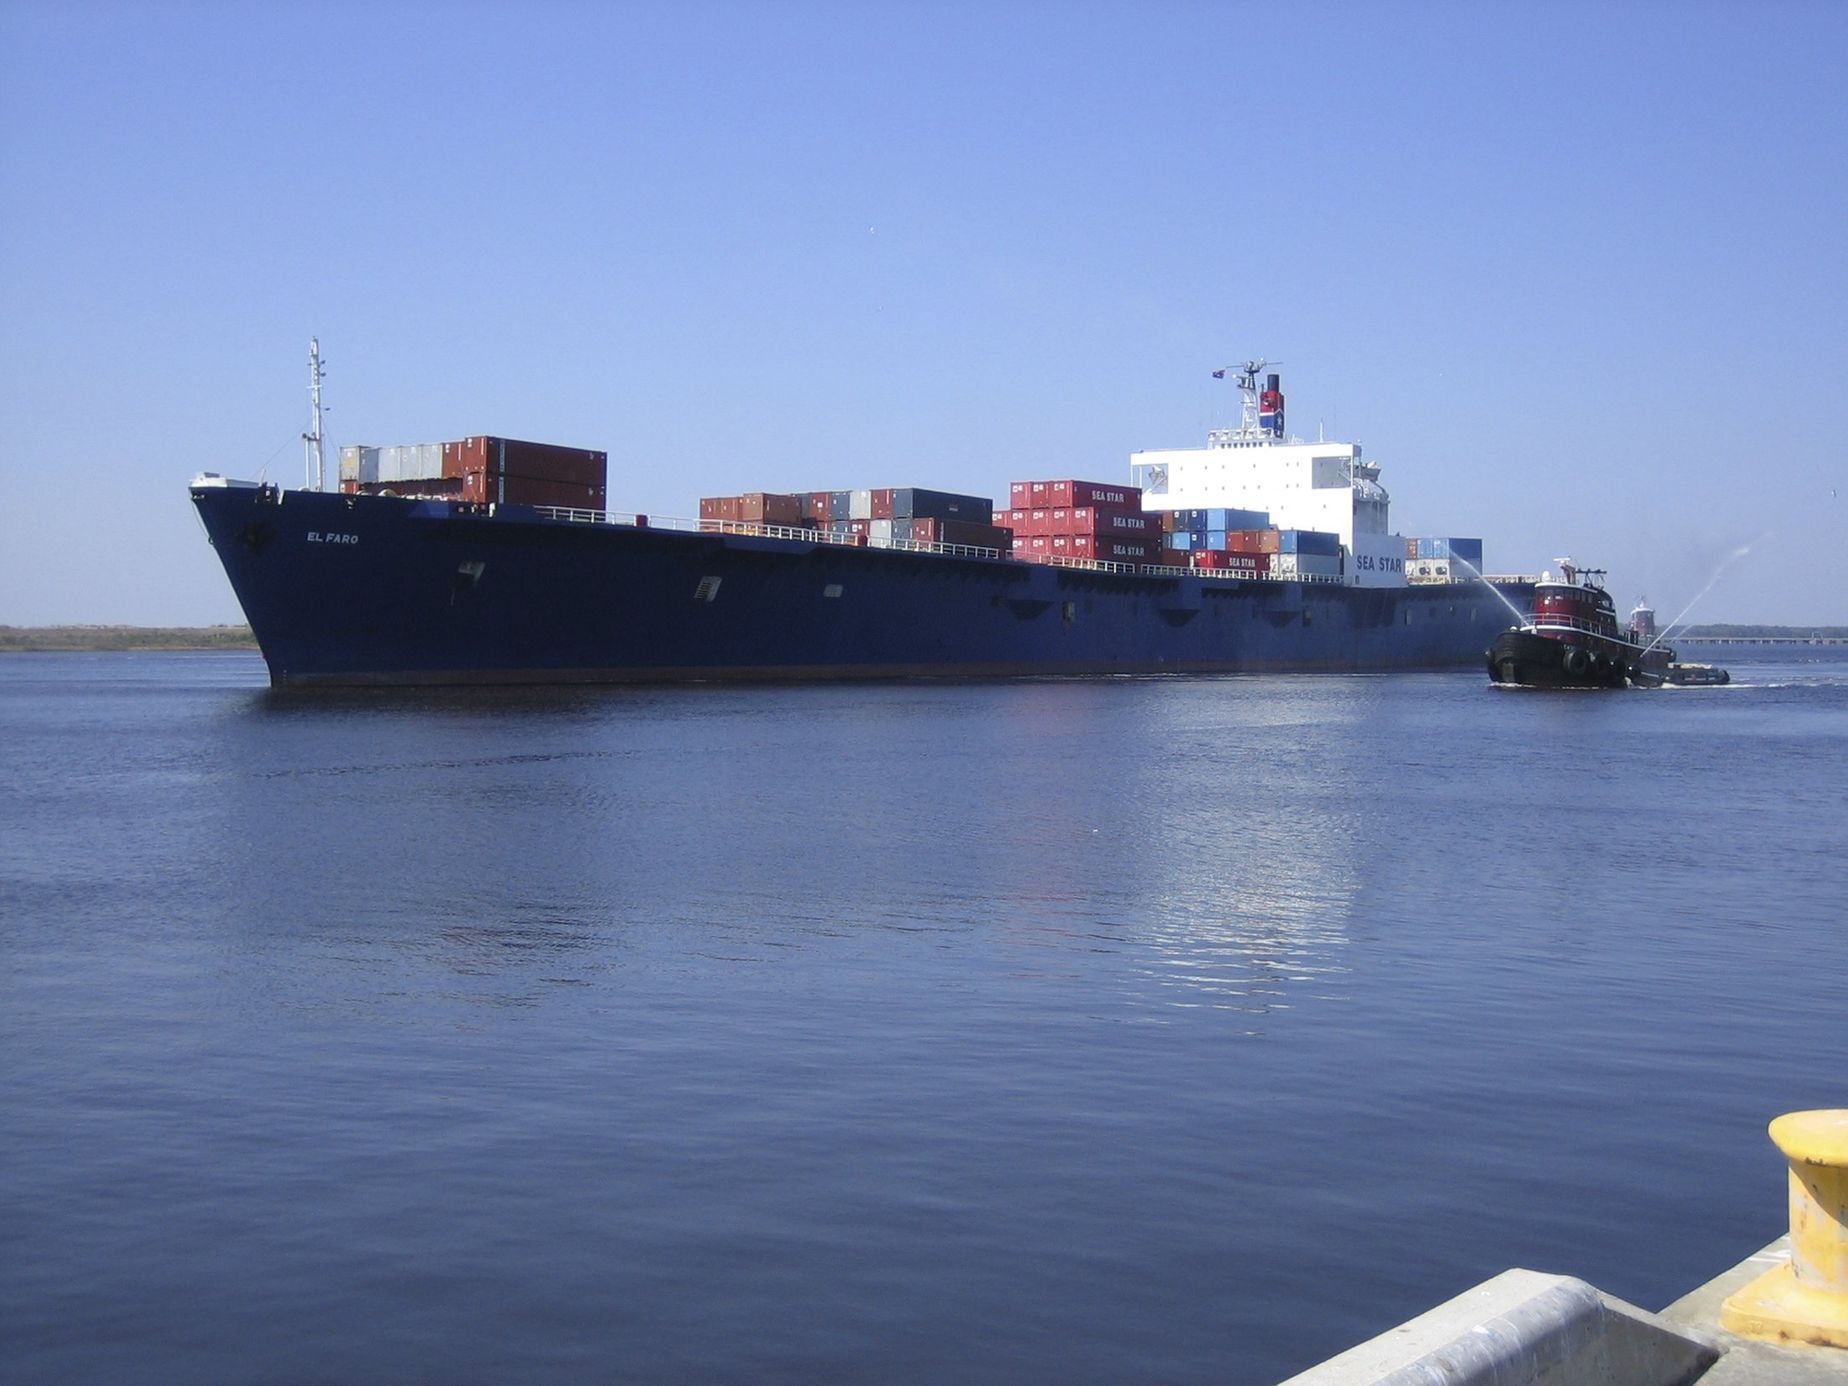 Hurikán Joaquin loď Handout photo of the El Faro, the 735 foot cargo ship with 33 crew aboard reported to be caught in Hurricande Joaquin